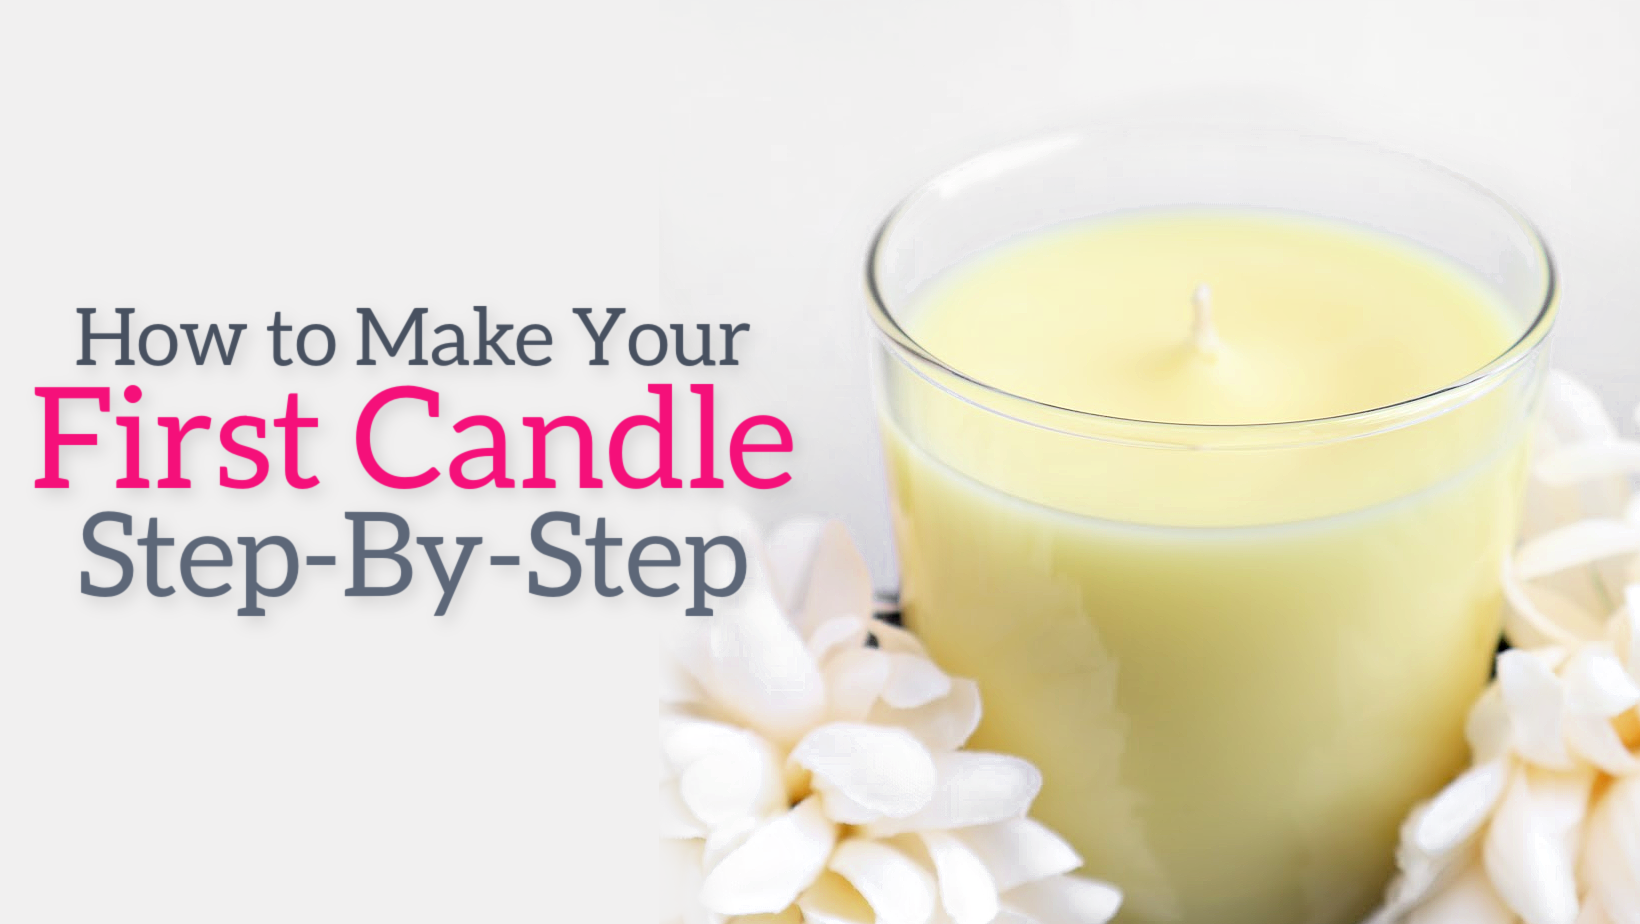 A thermometer has an important role in candle making to get the